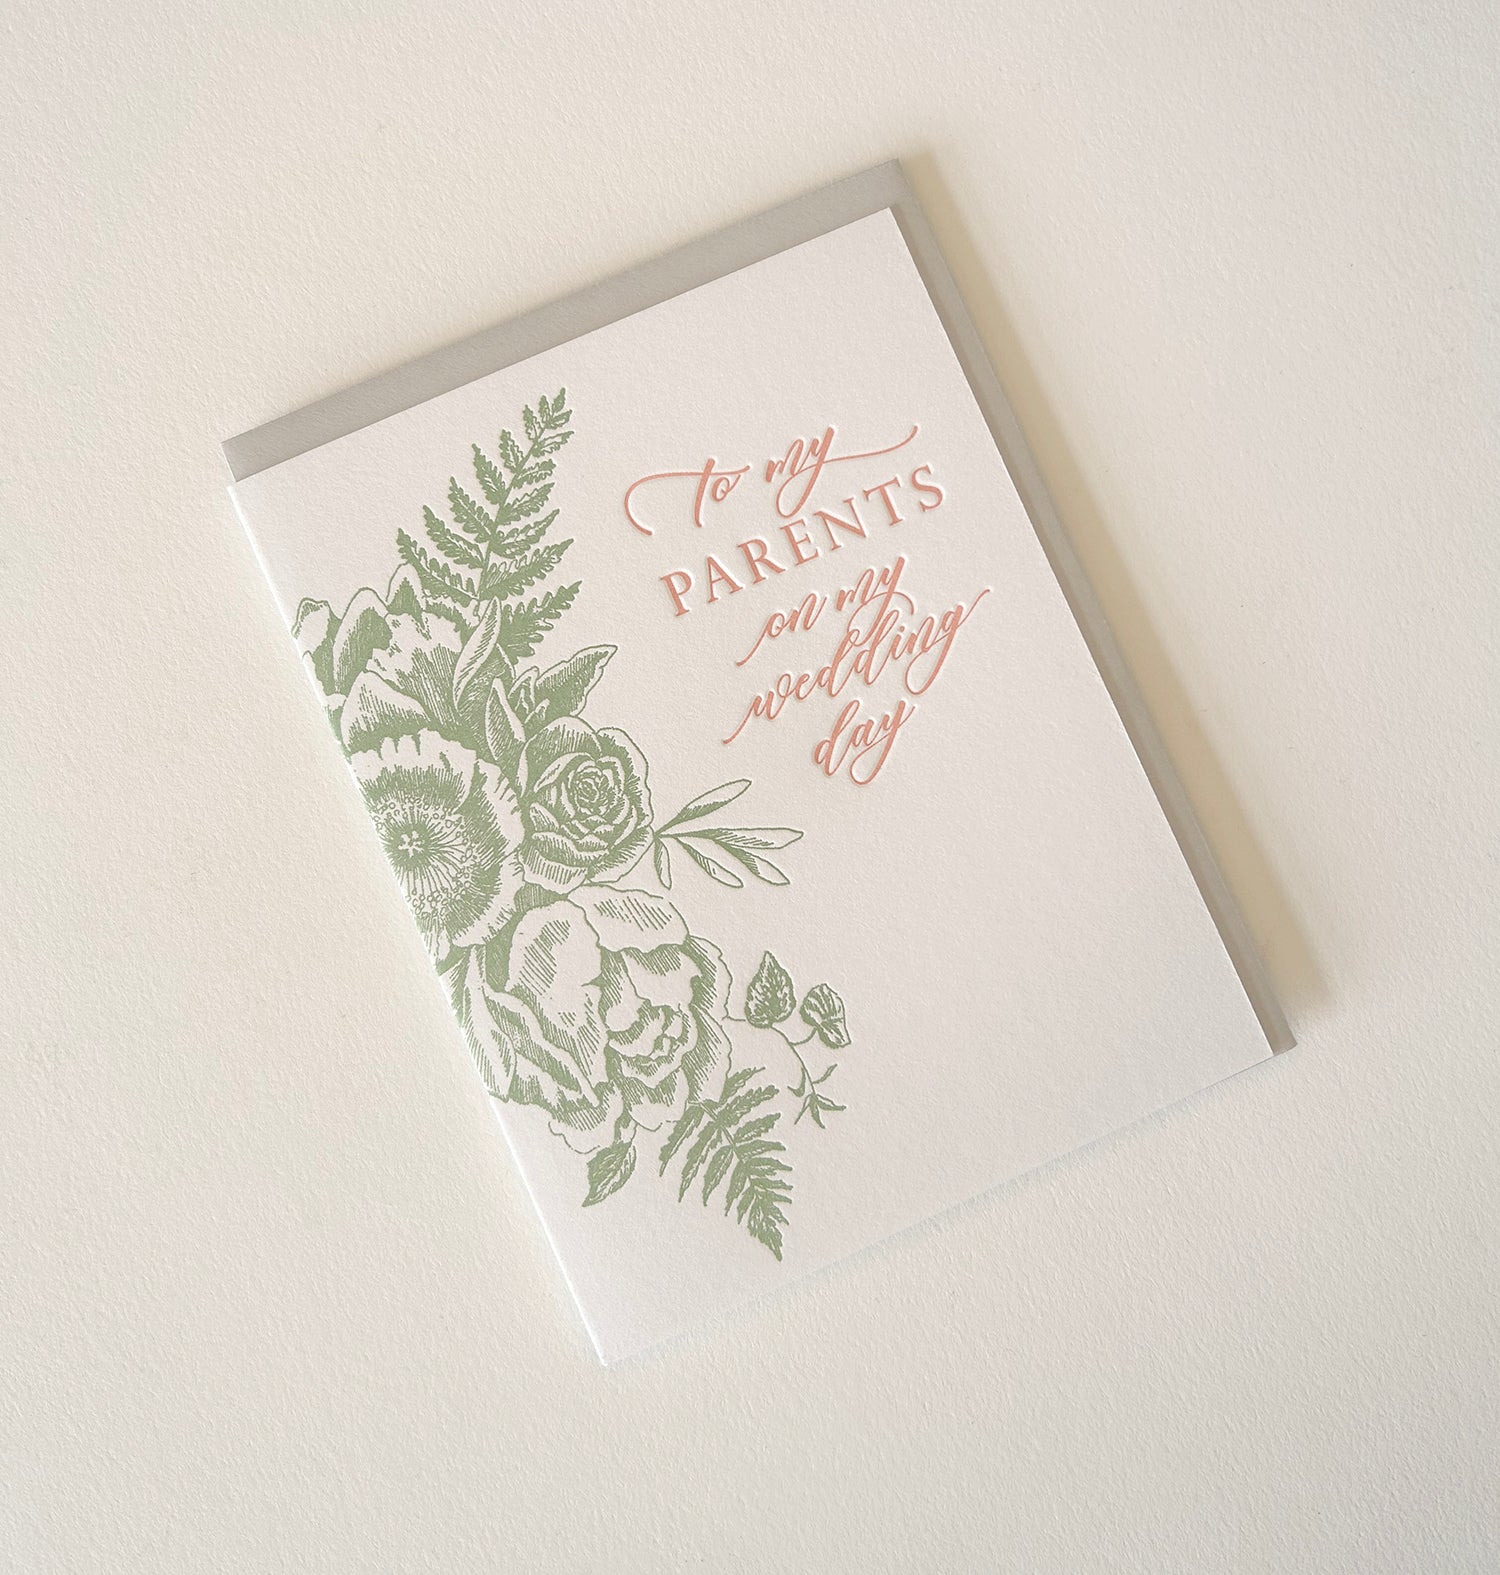 Letterpress wedding card with florals that says "to my parents on my wedding day" by Rust Belt Love